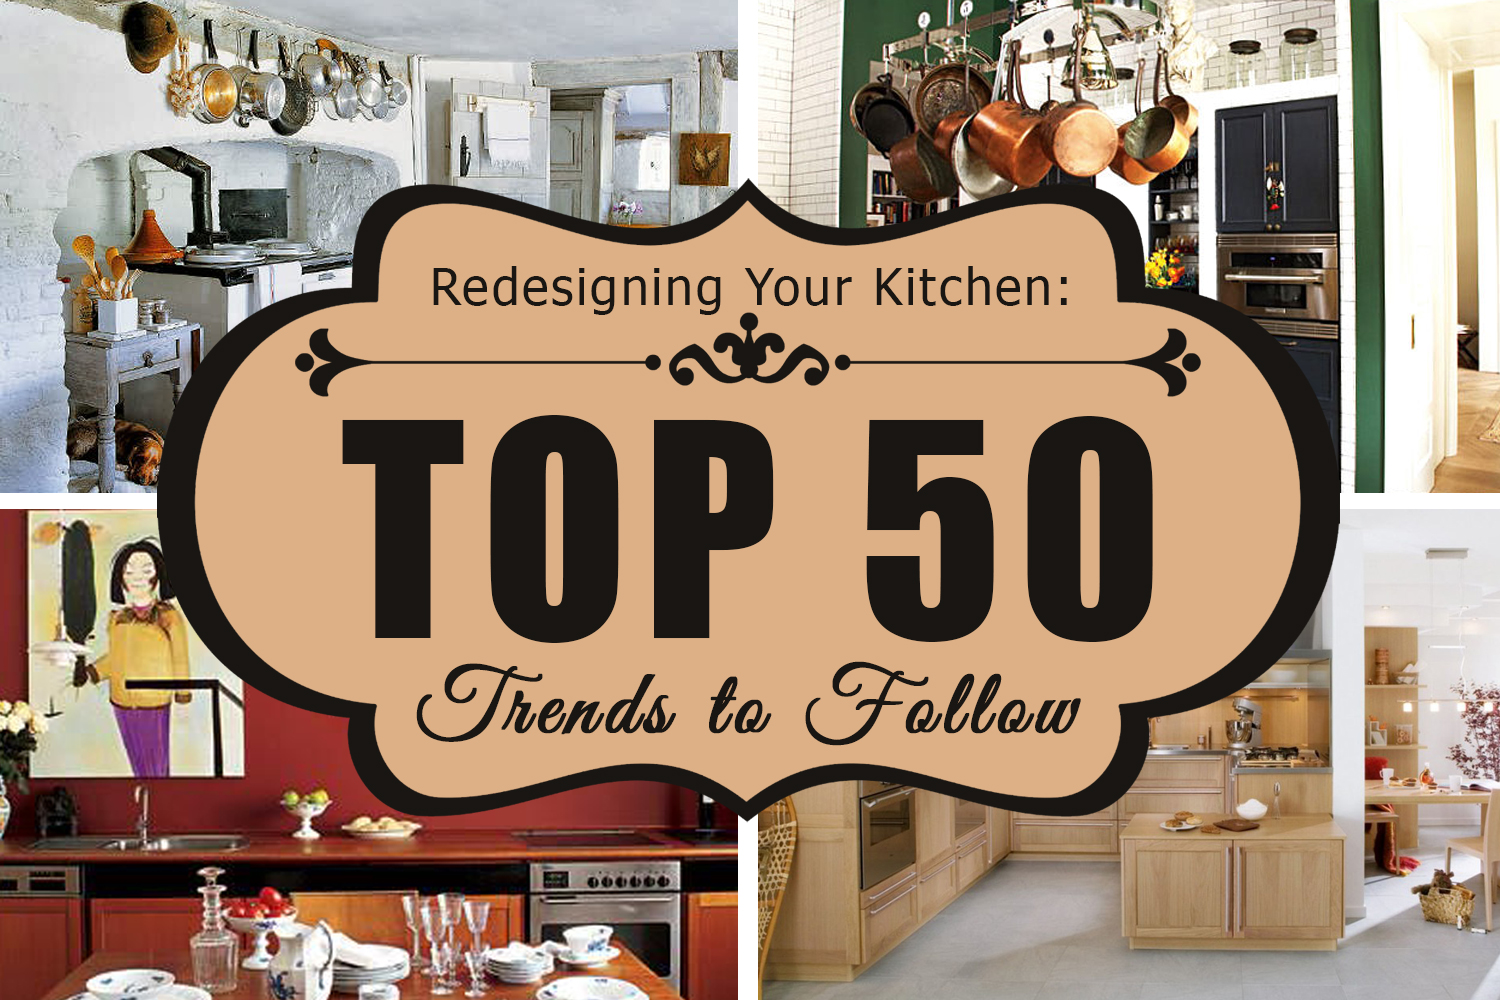 Redesigning Your Kitchen: Top 50 Trends to Follow